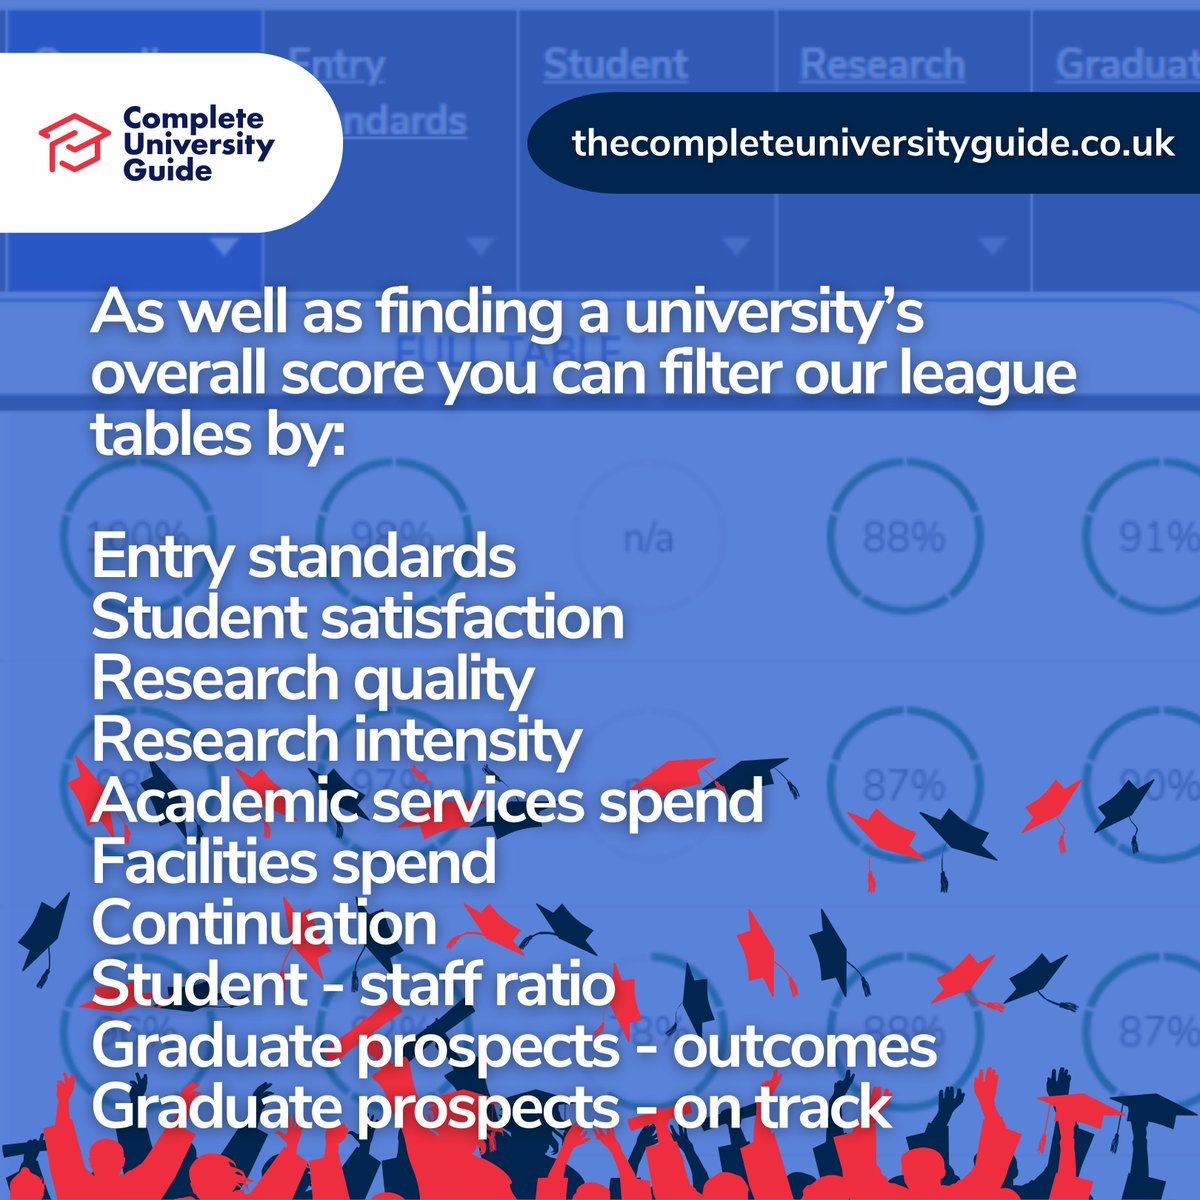 As well as discovering a university's overall score you can filter our tables by ten other measures. Explore our league tables and filter by what matters to you. 2025 League Tables here 👉 bit.ly/3JQB9em #leaguetables2025 #rankings #university #students